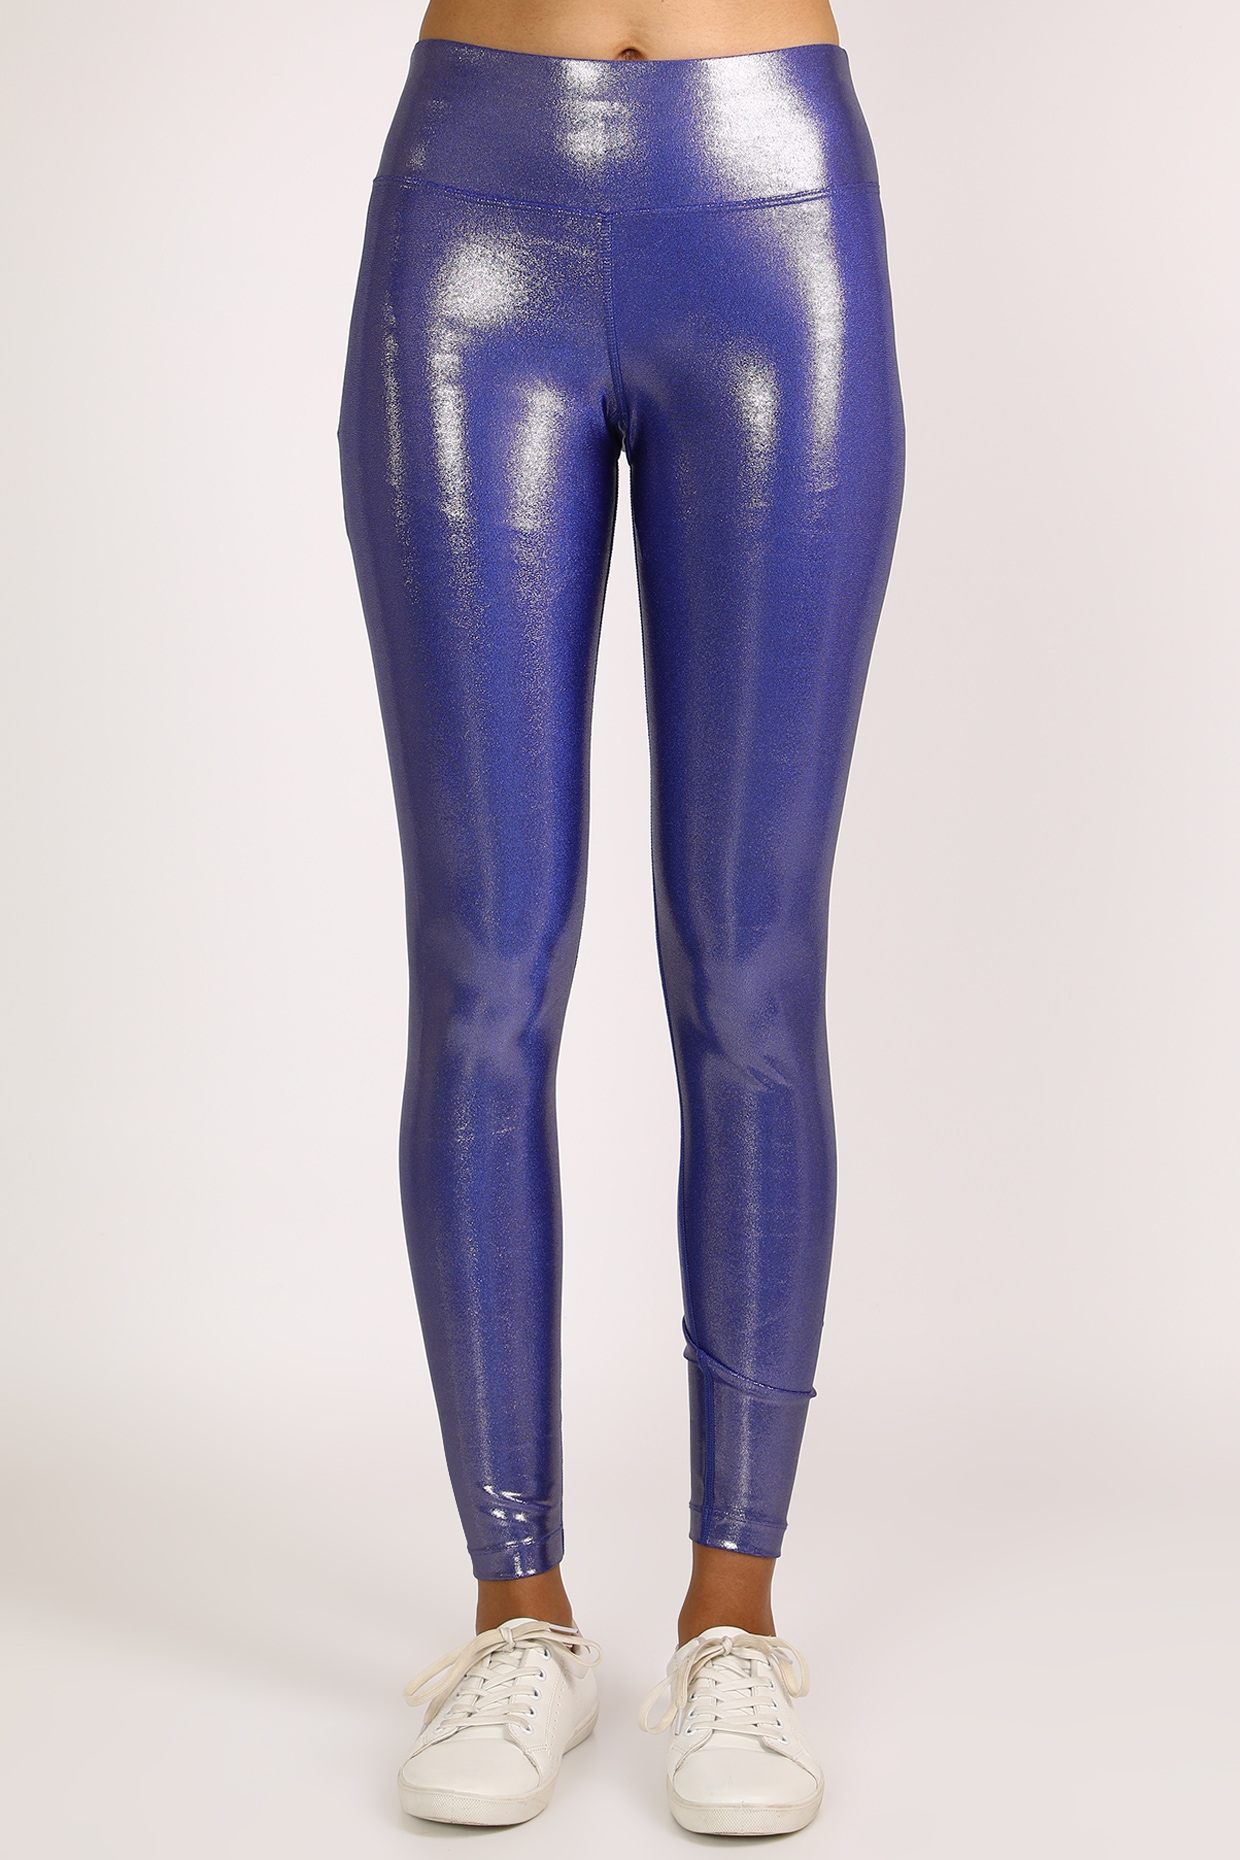 Blueberry Blue Shiny Leggings Wet Look Metallic Stretchy Tights Navy Gloss  Exercise Clothing Festive Festival Outwear Streetwear Wet Shine - Etsy